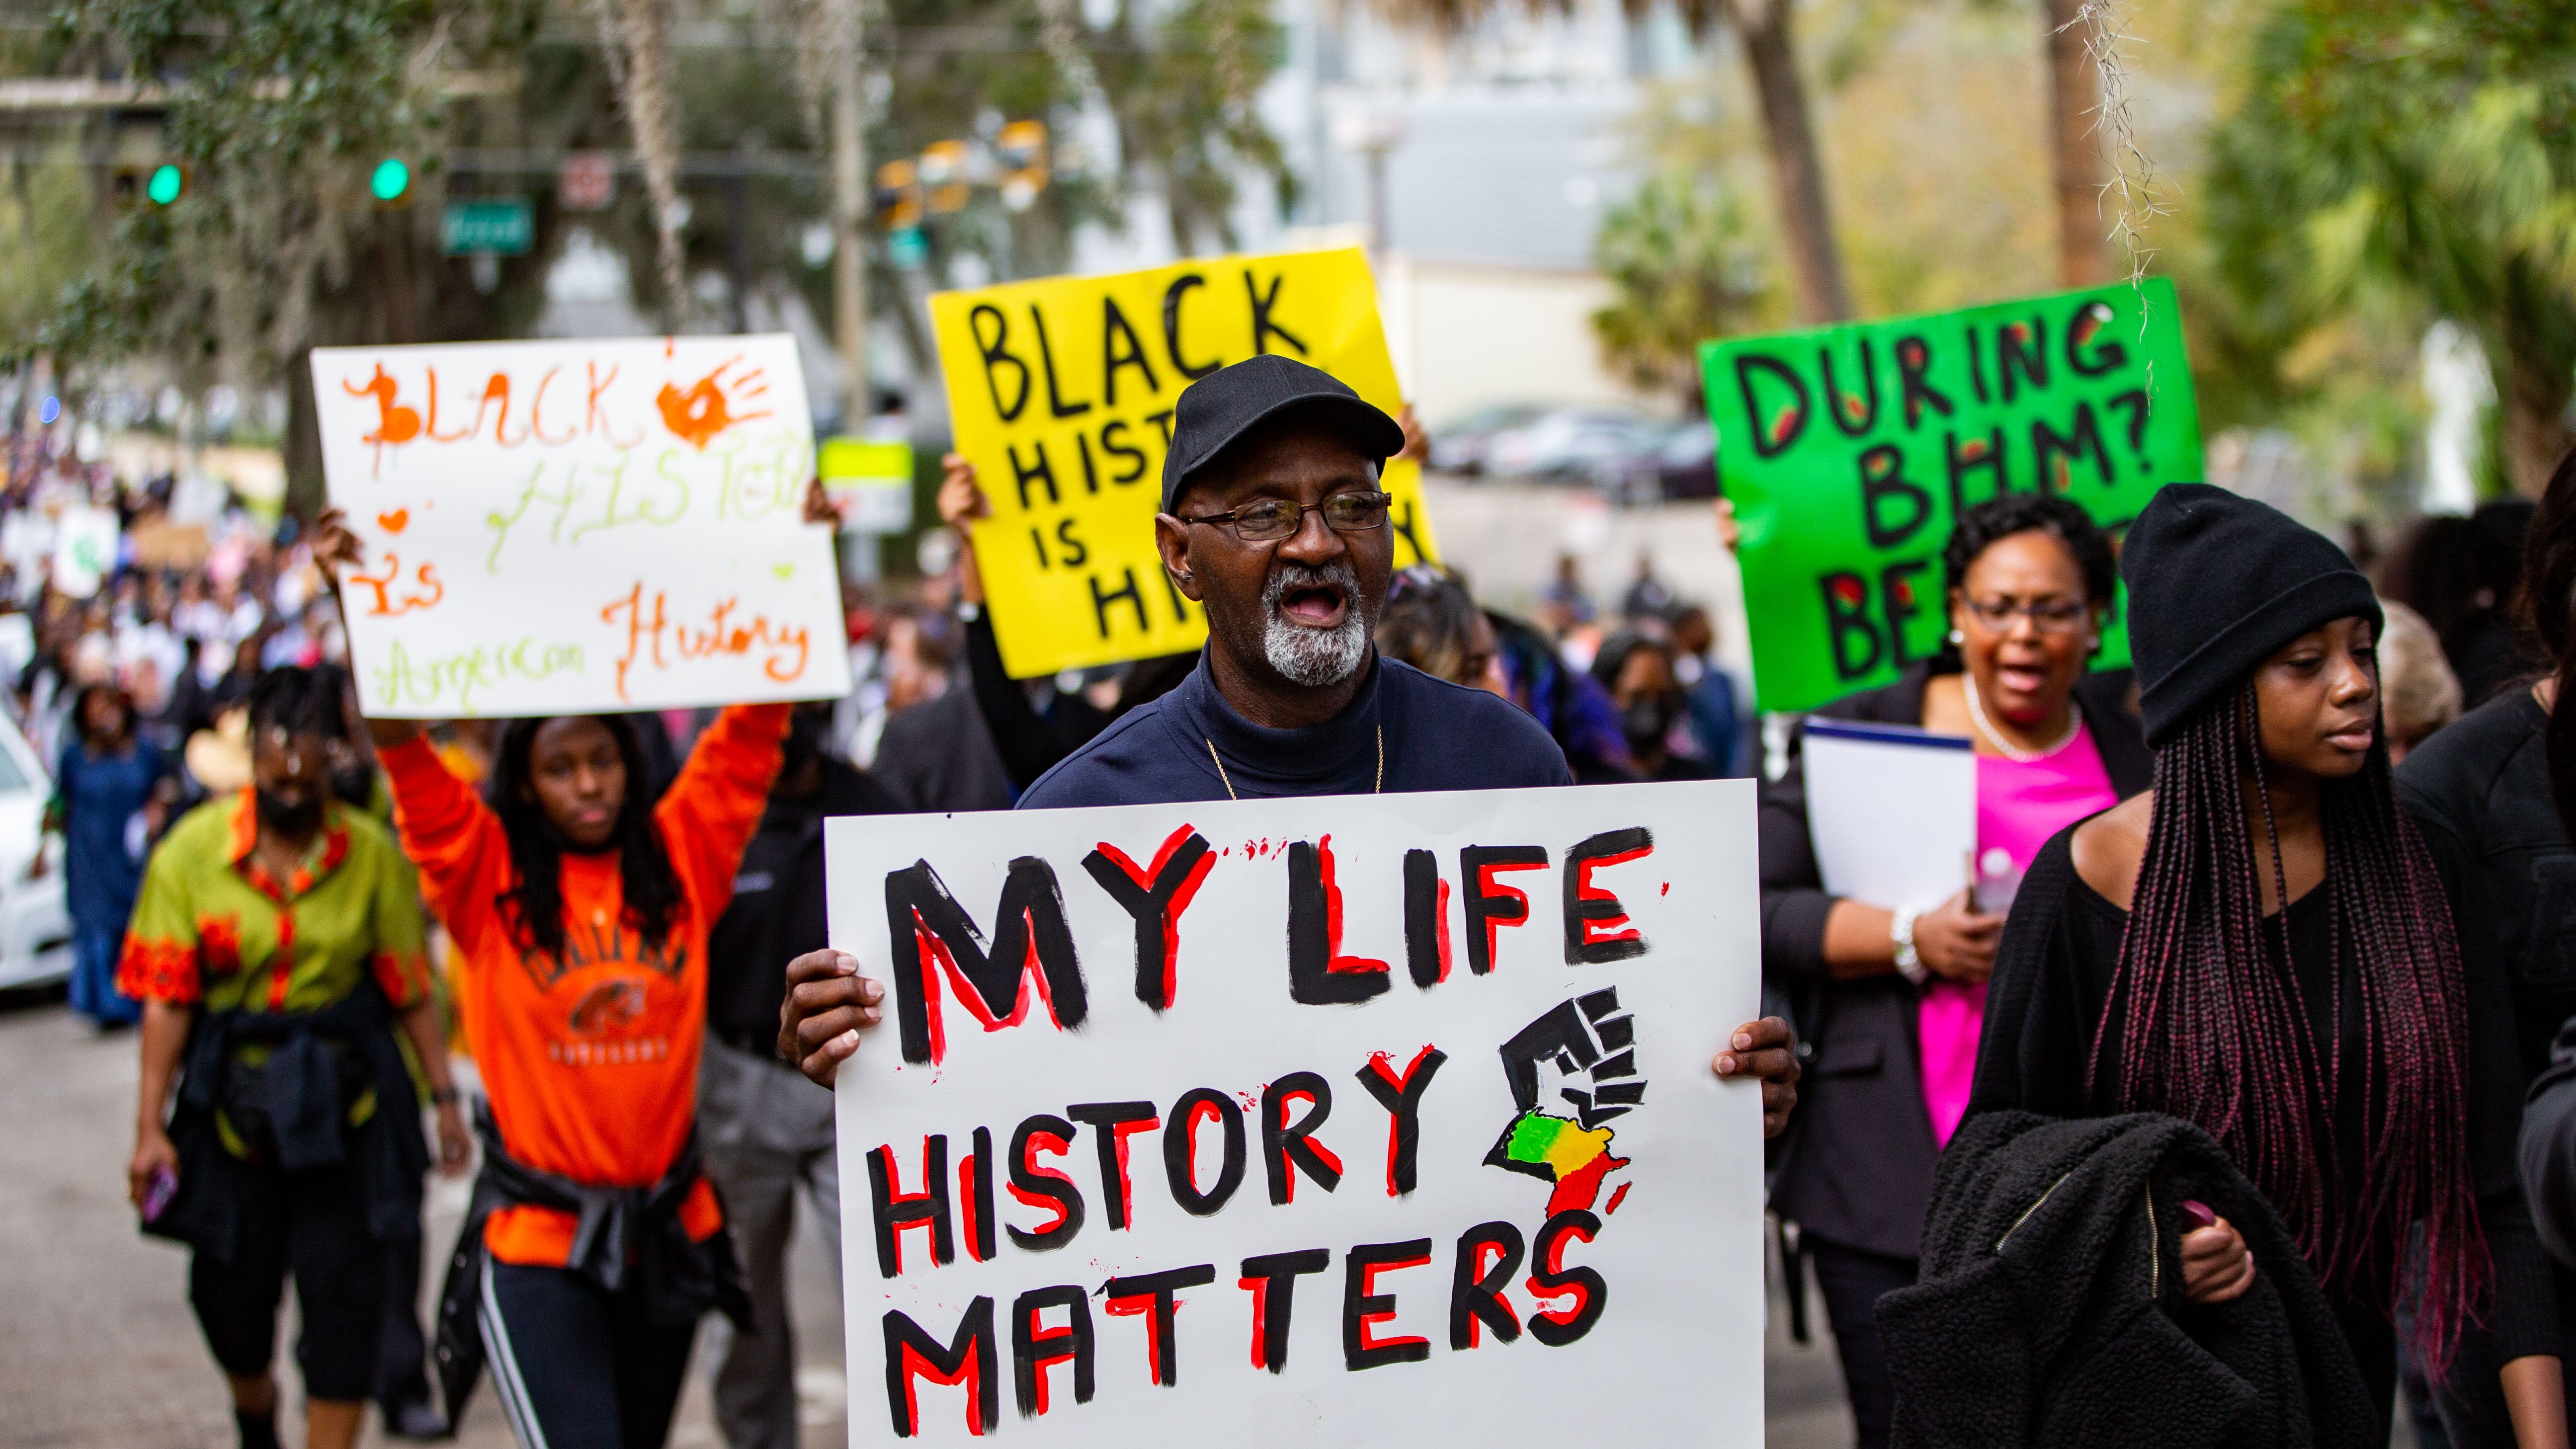 Hundreds participated in the National Action Network demonstration in response to Gov. Ron DeSantis's efforts to minimize diverse education. The activists chanted and carried signs while making their way from Bethel Missionary Baptist Church in Tallahassee, Florida to the Capitol building Wednesday, Feb. 15, 2023.